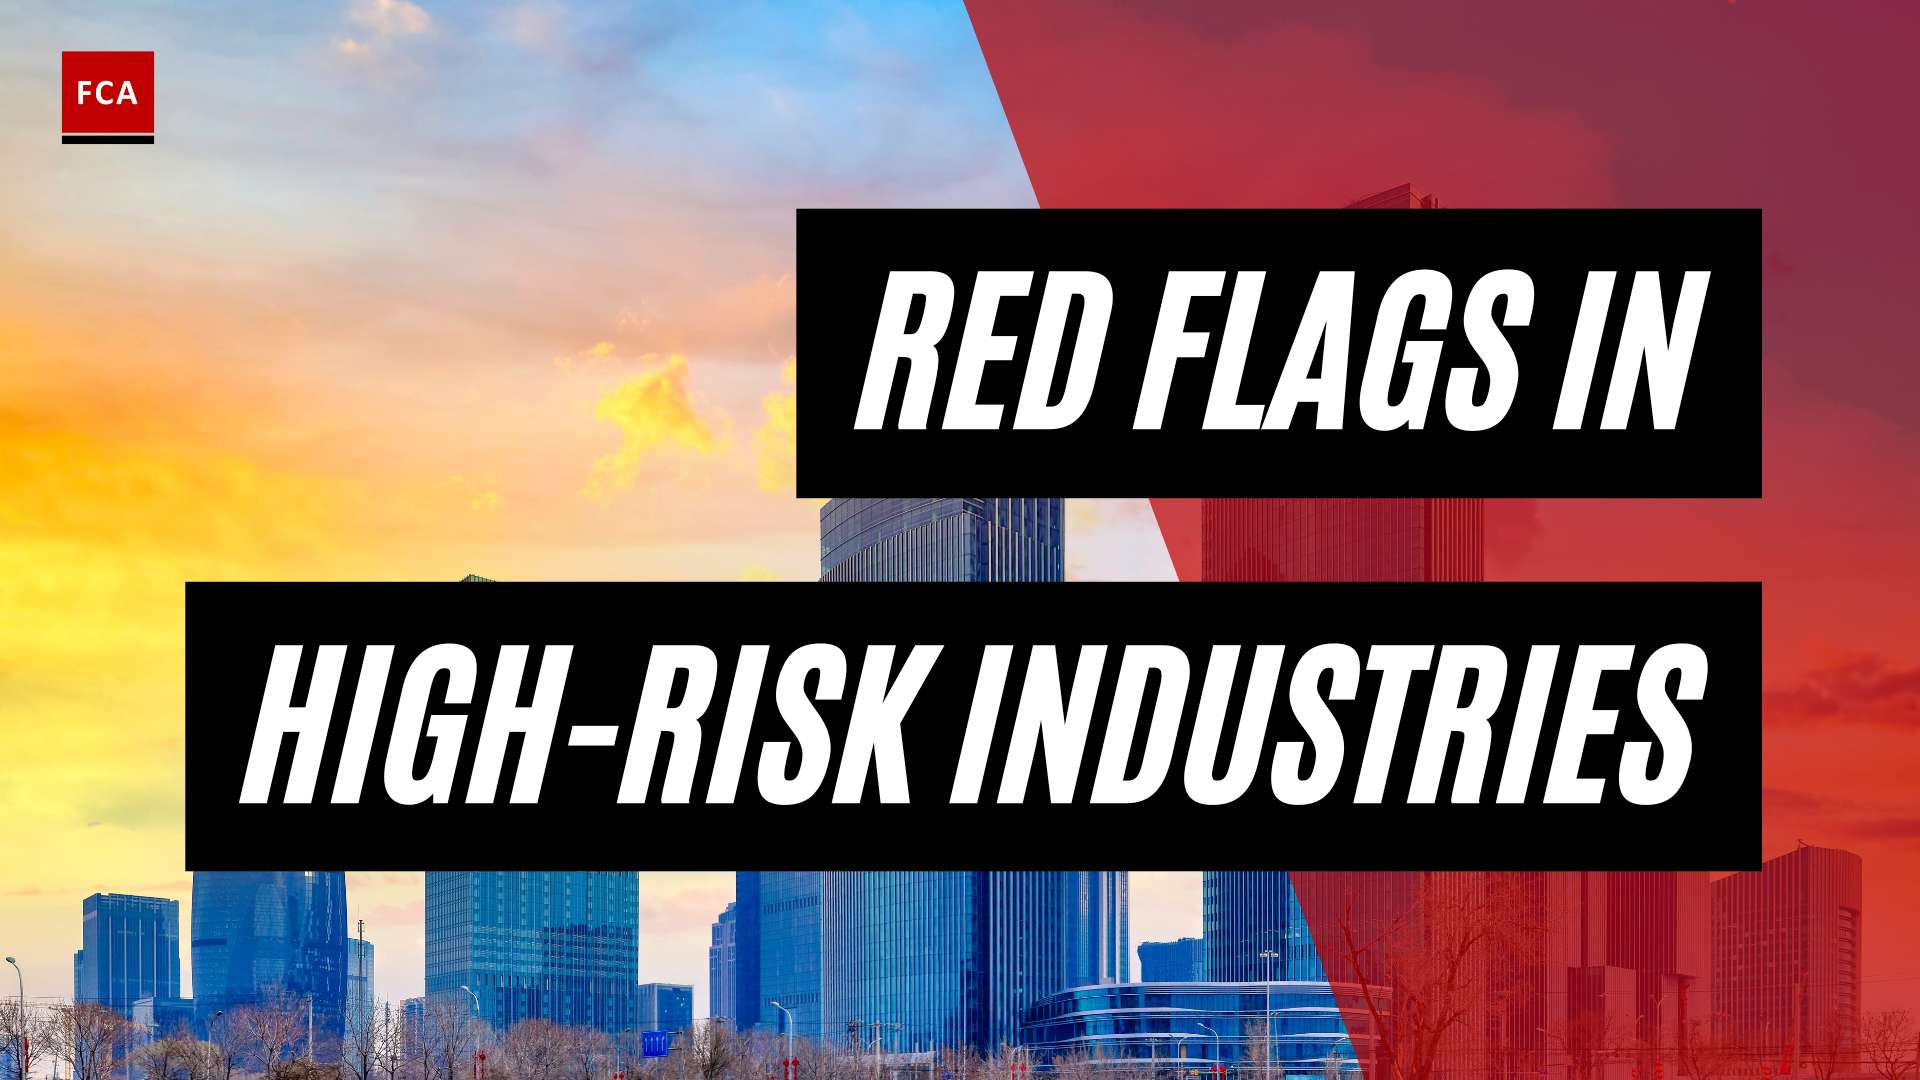 Powerful Indicators: Red Flags In High-Risk Industries Exposed